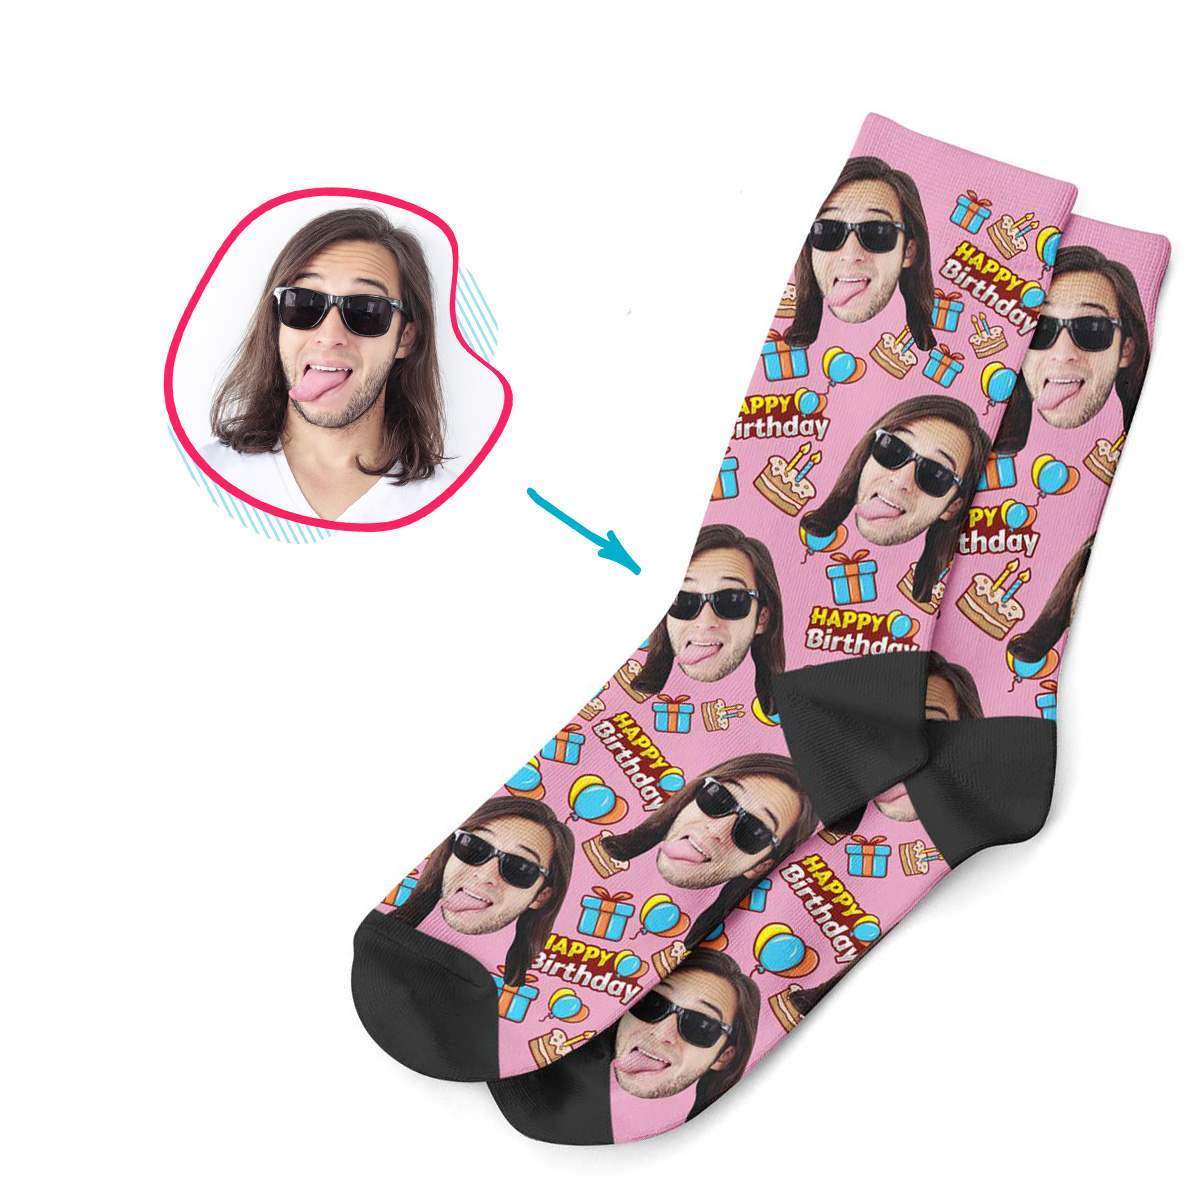 pink Birthday socks personalized with photo of face printed on them